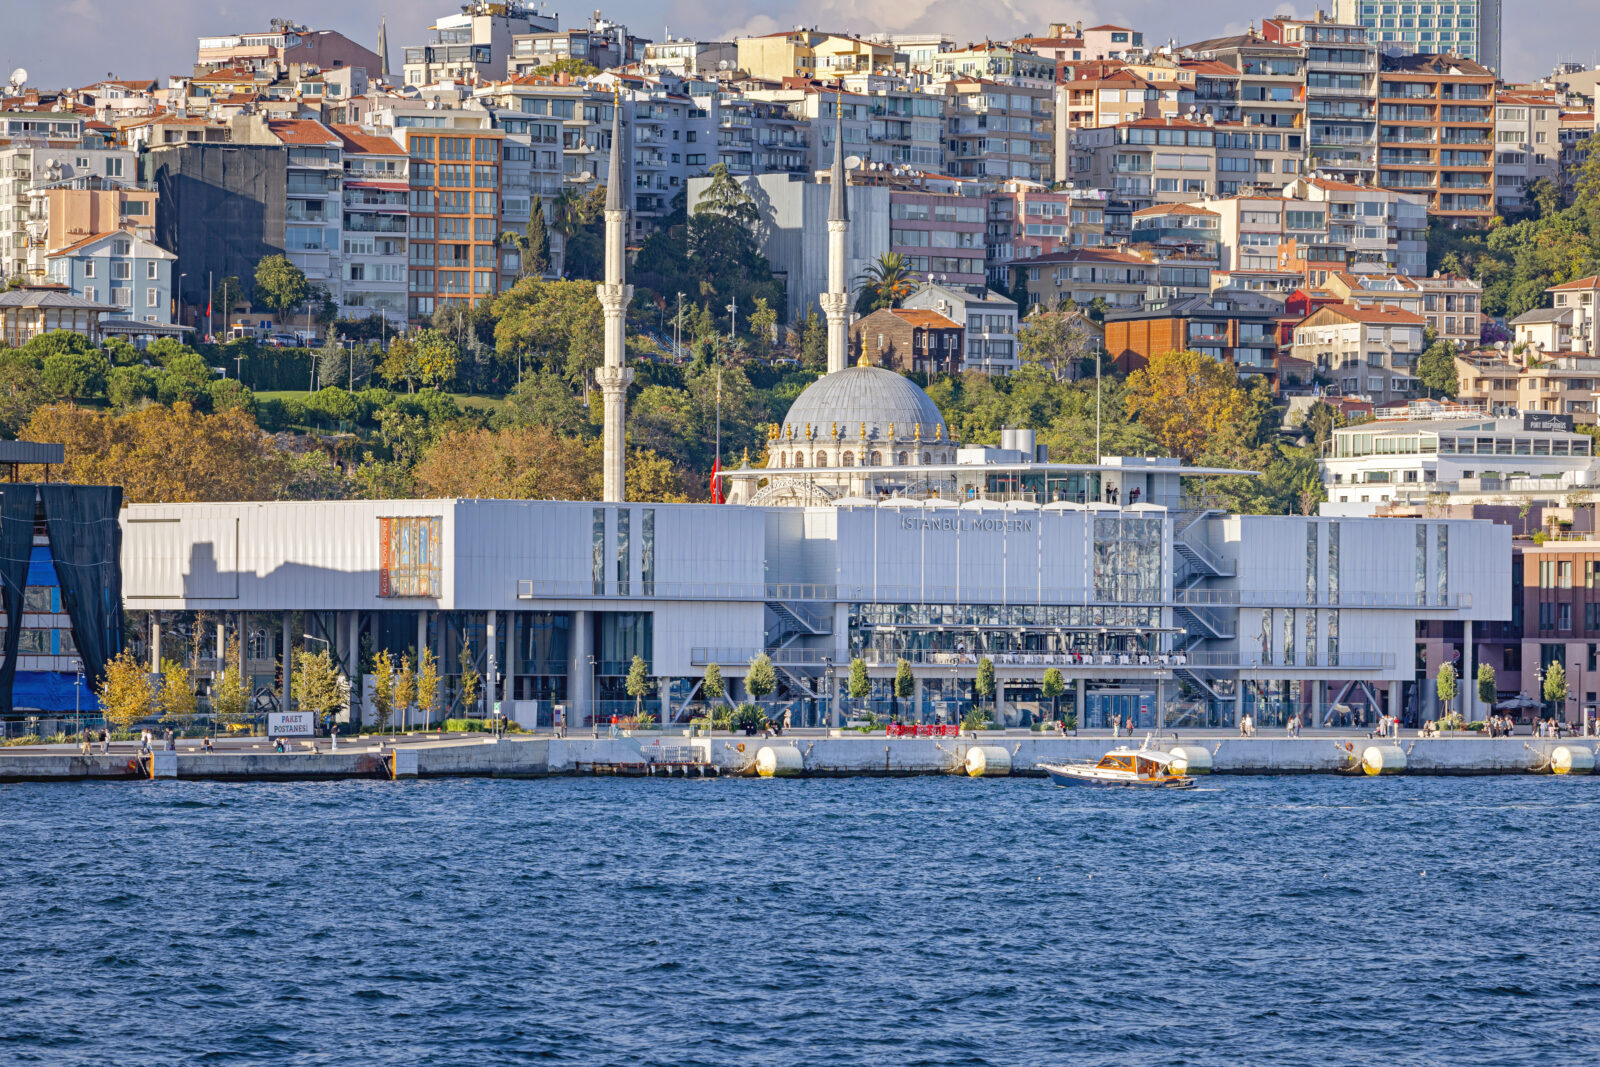 Which museums are open in Istanbul during Eid al-Adha?